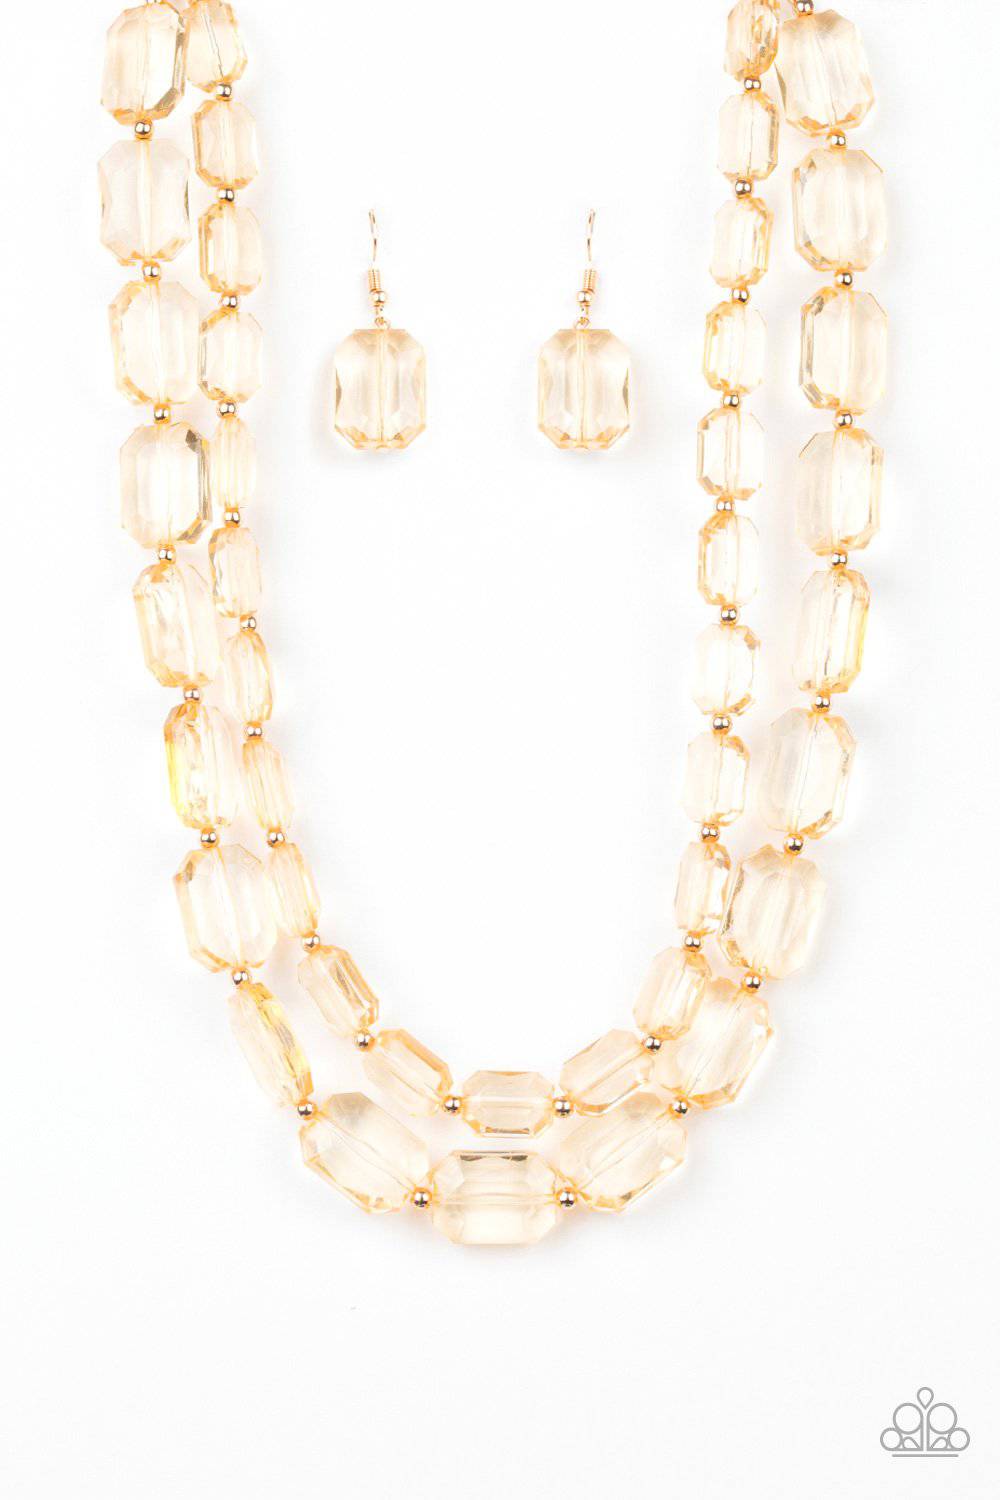 Ice Bank - Gold Acrylic Bead Necklace - Paparazzi Accessories - GlaMarous Titi Jewels